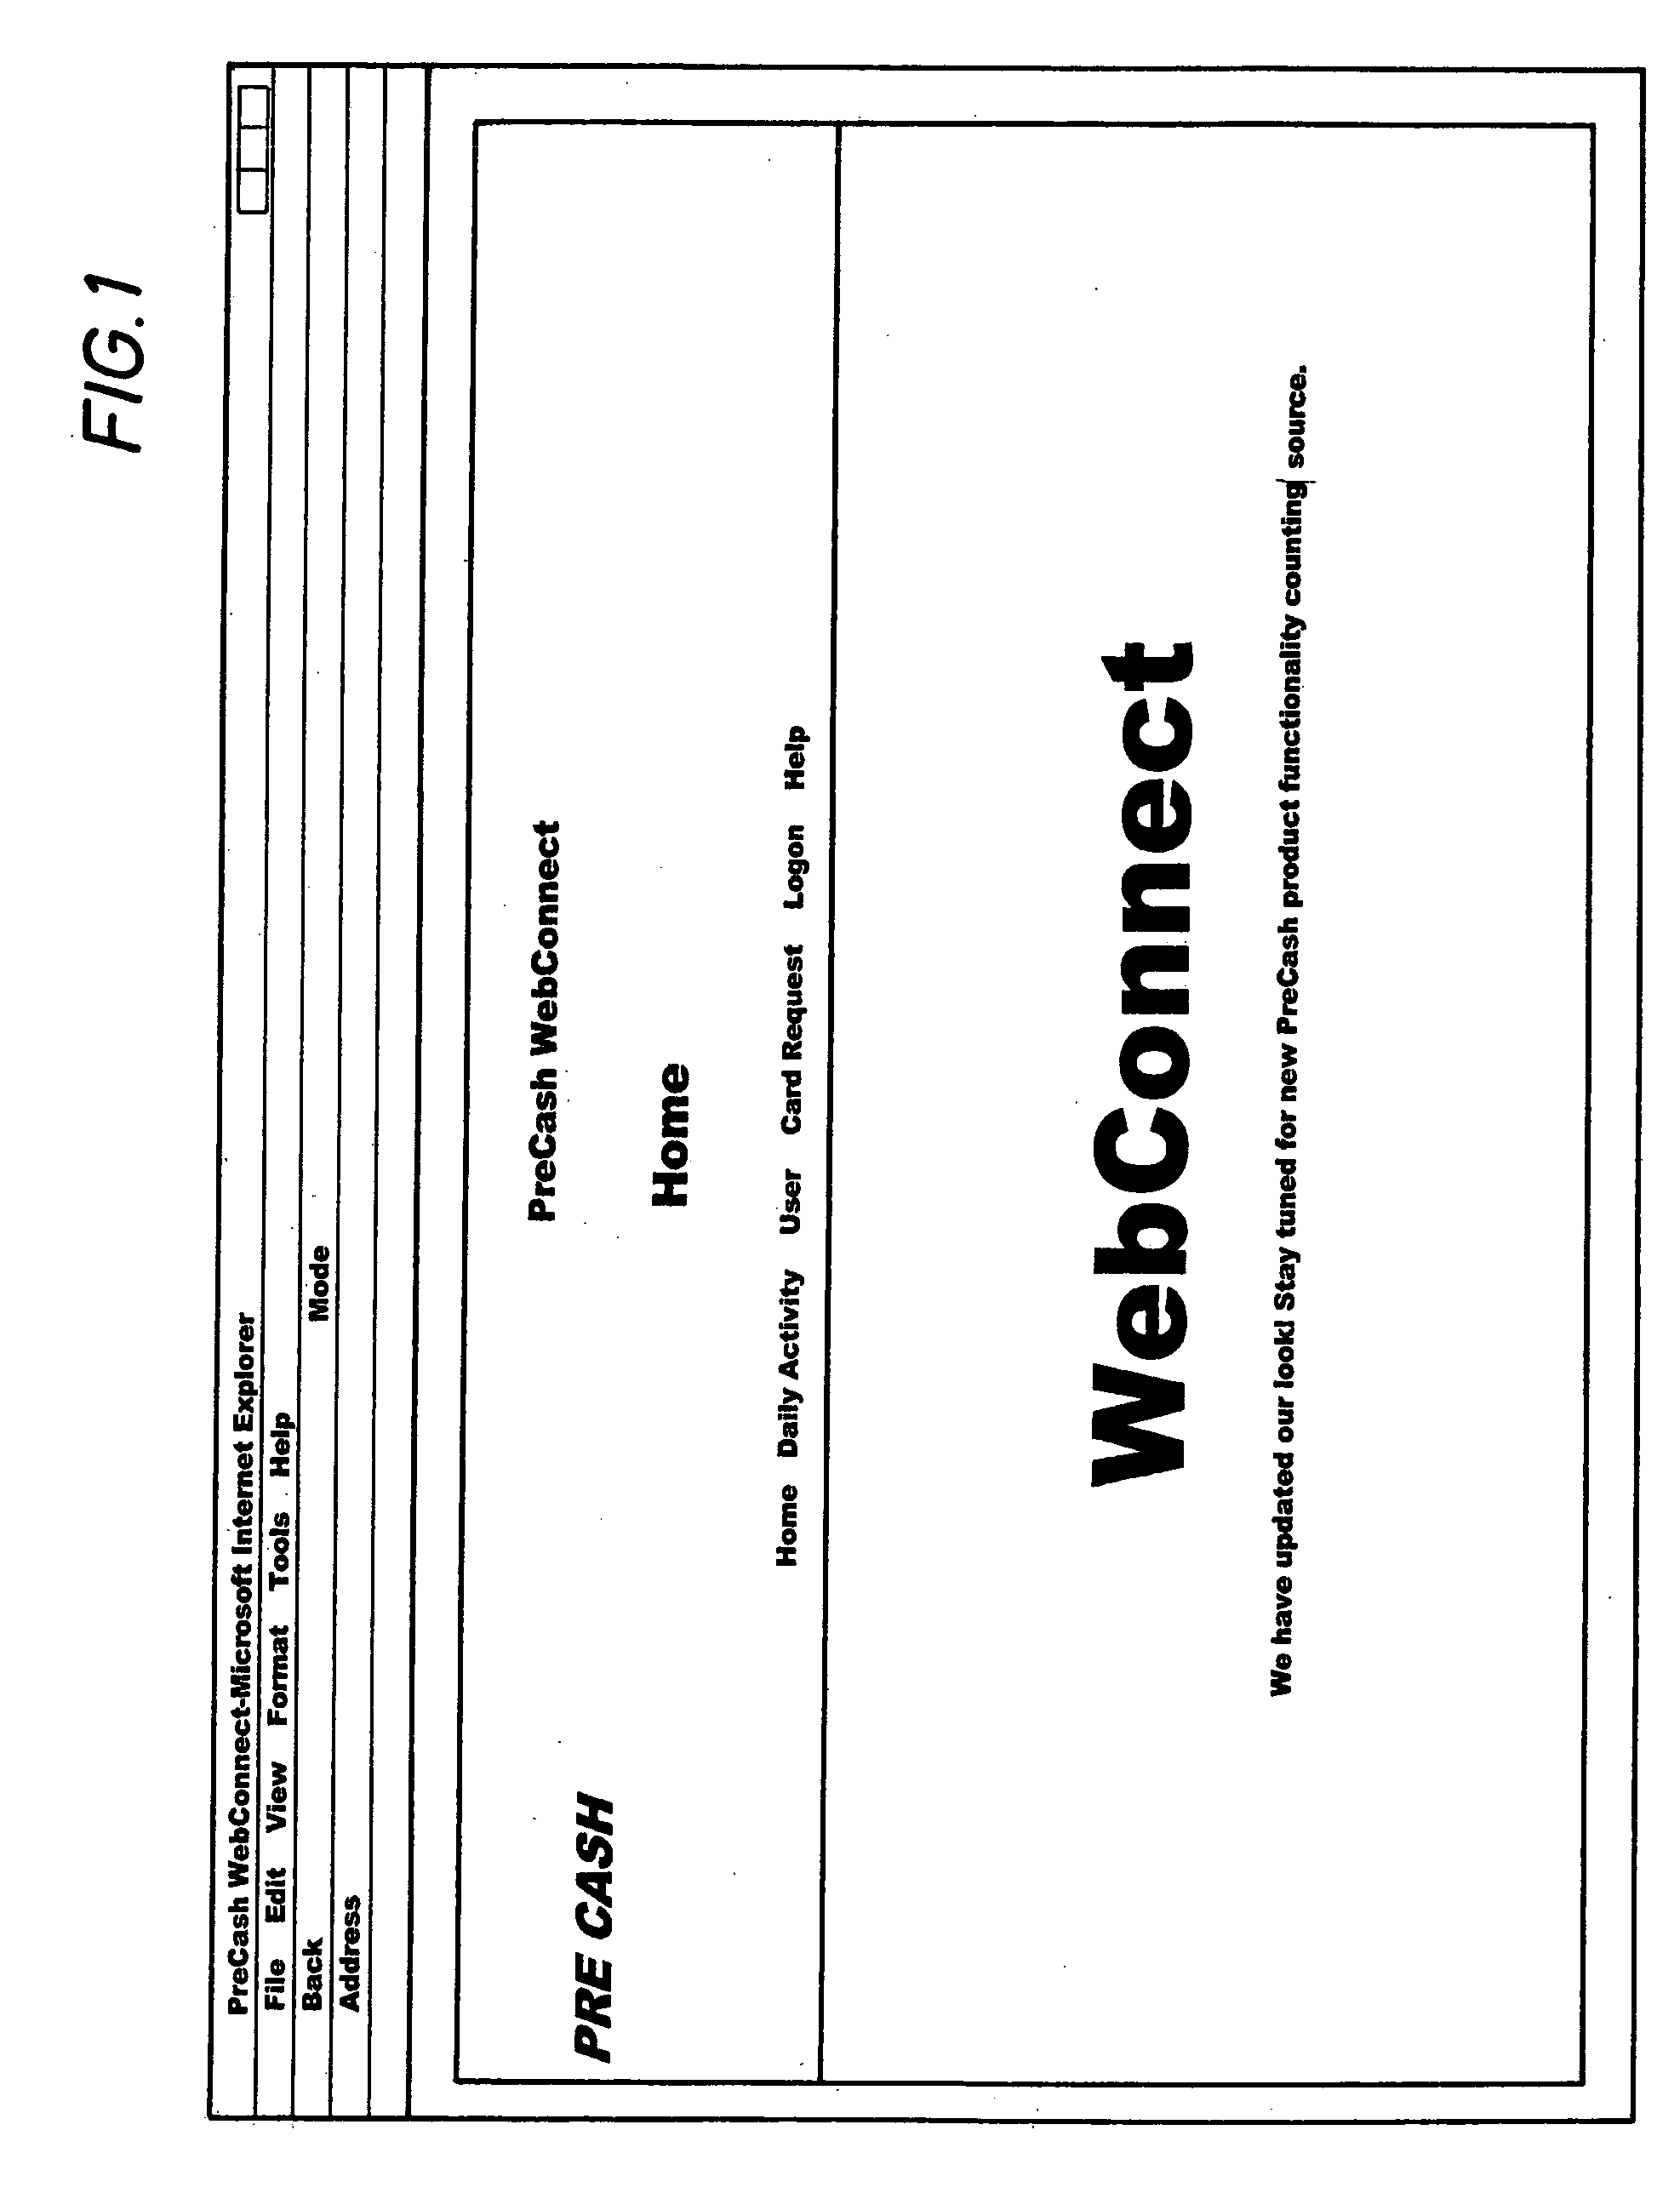 System and method for facilitating large scale payment transactions including selecting communication routes